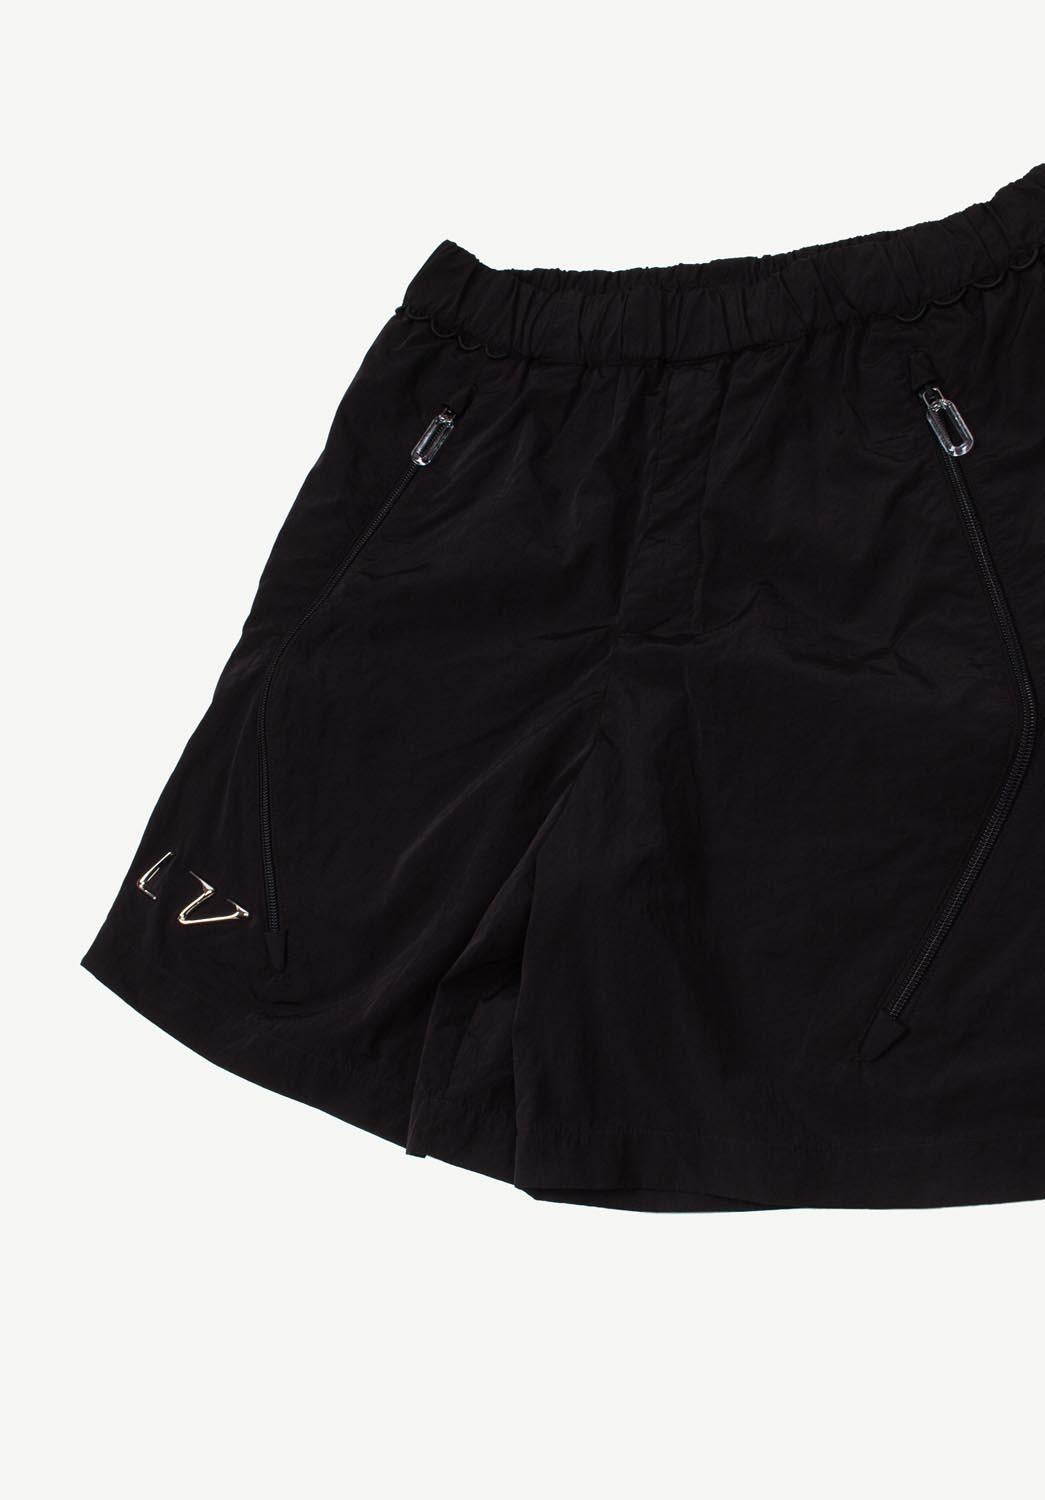 Item for sale is 100% genuine Louis Vuitton Men Shorts Size 40 S220
Color: Black
(An actual color may a bit vary due to individual computer screen interpretation)
Material: 100% polyamide
Tag size: 40 (runs Large) 
These shorts are great quality